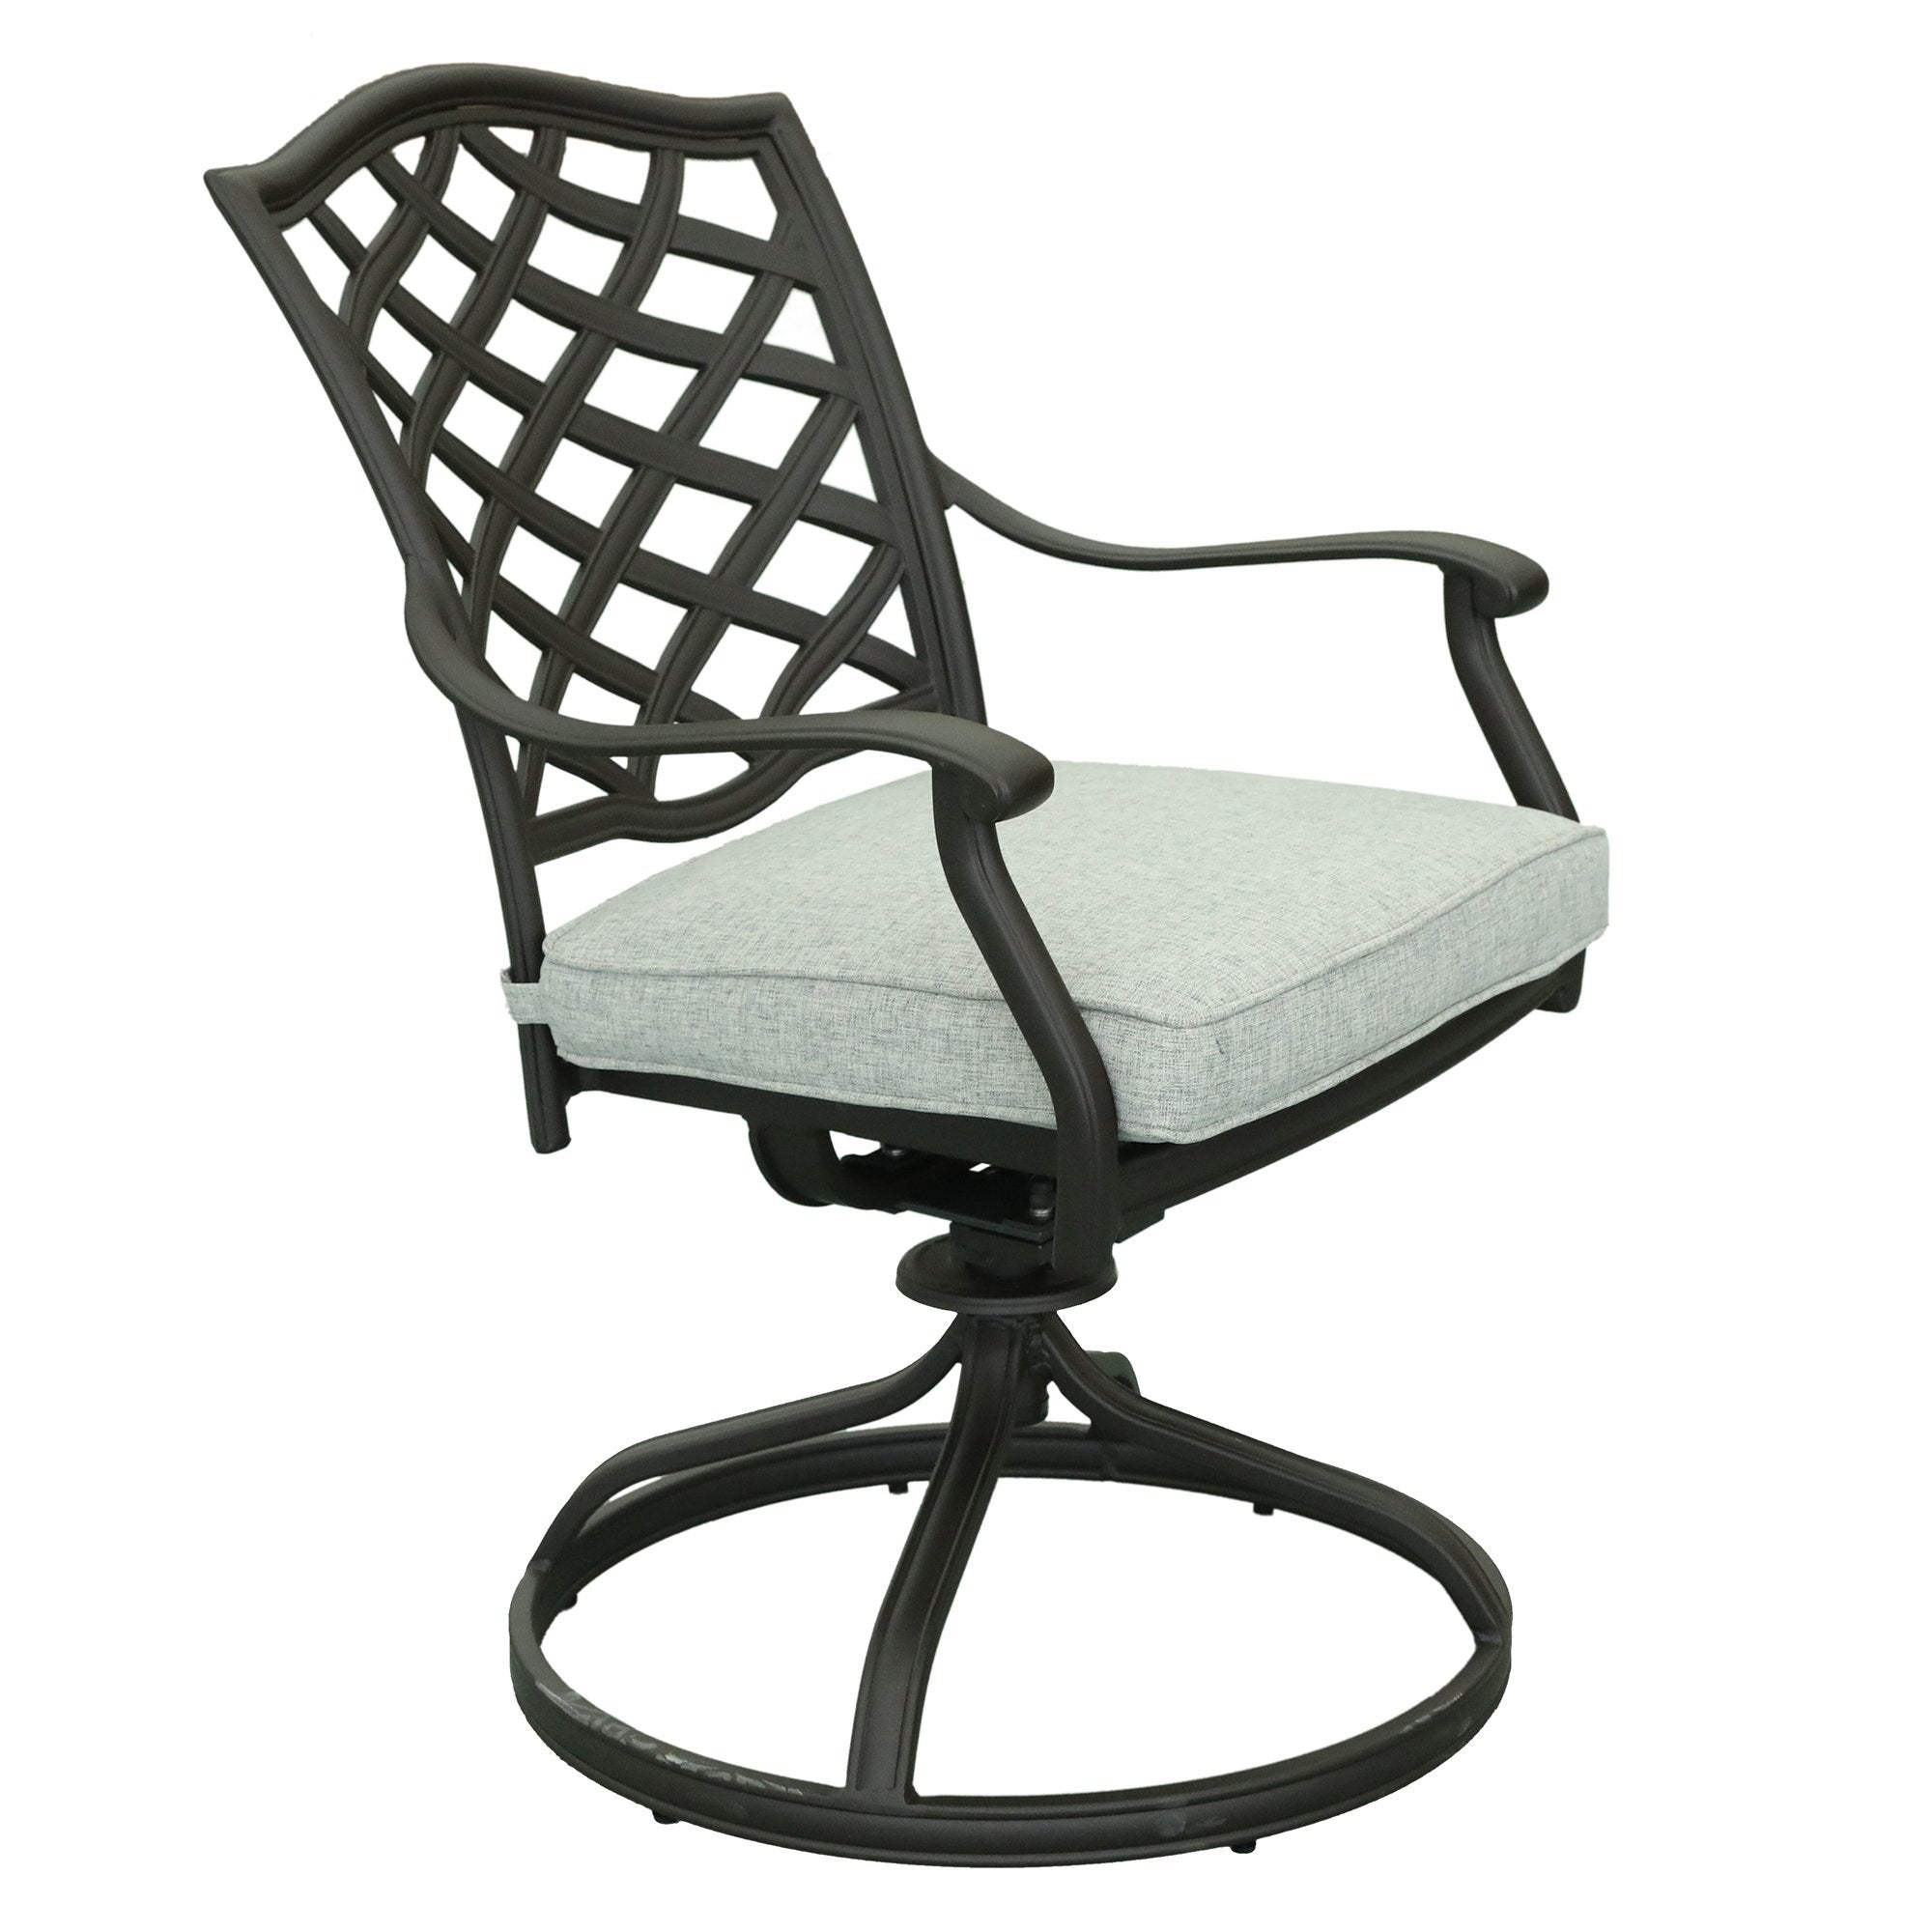 Outdoor Cast Aluminum Dining Swivel Chair With Cushion(Set of 2)